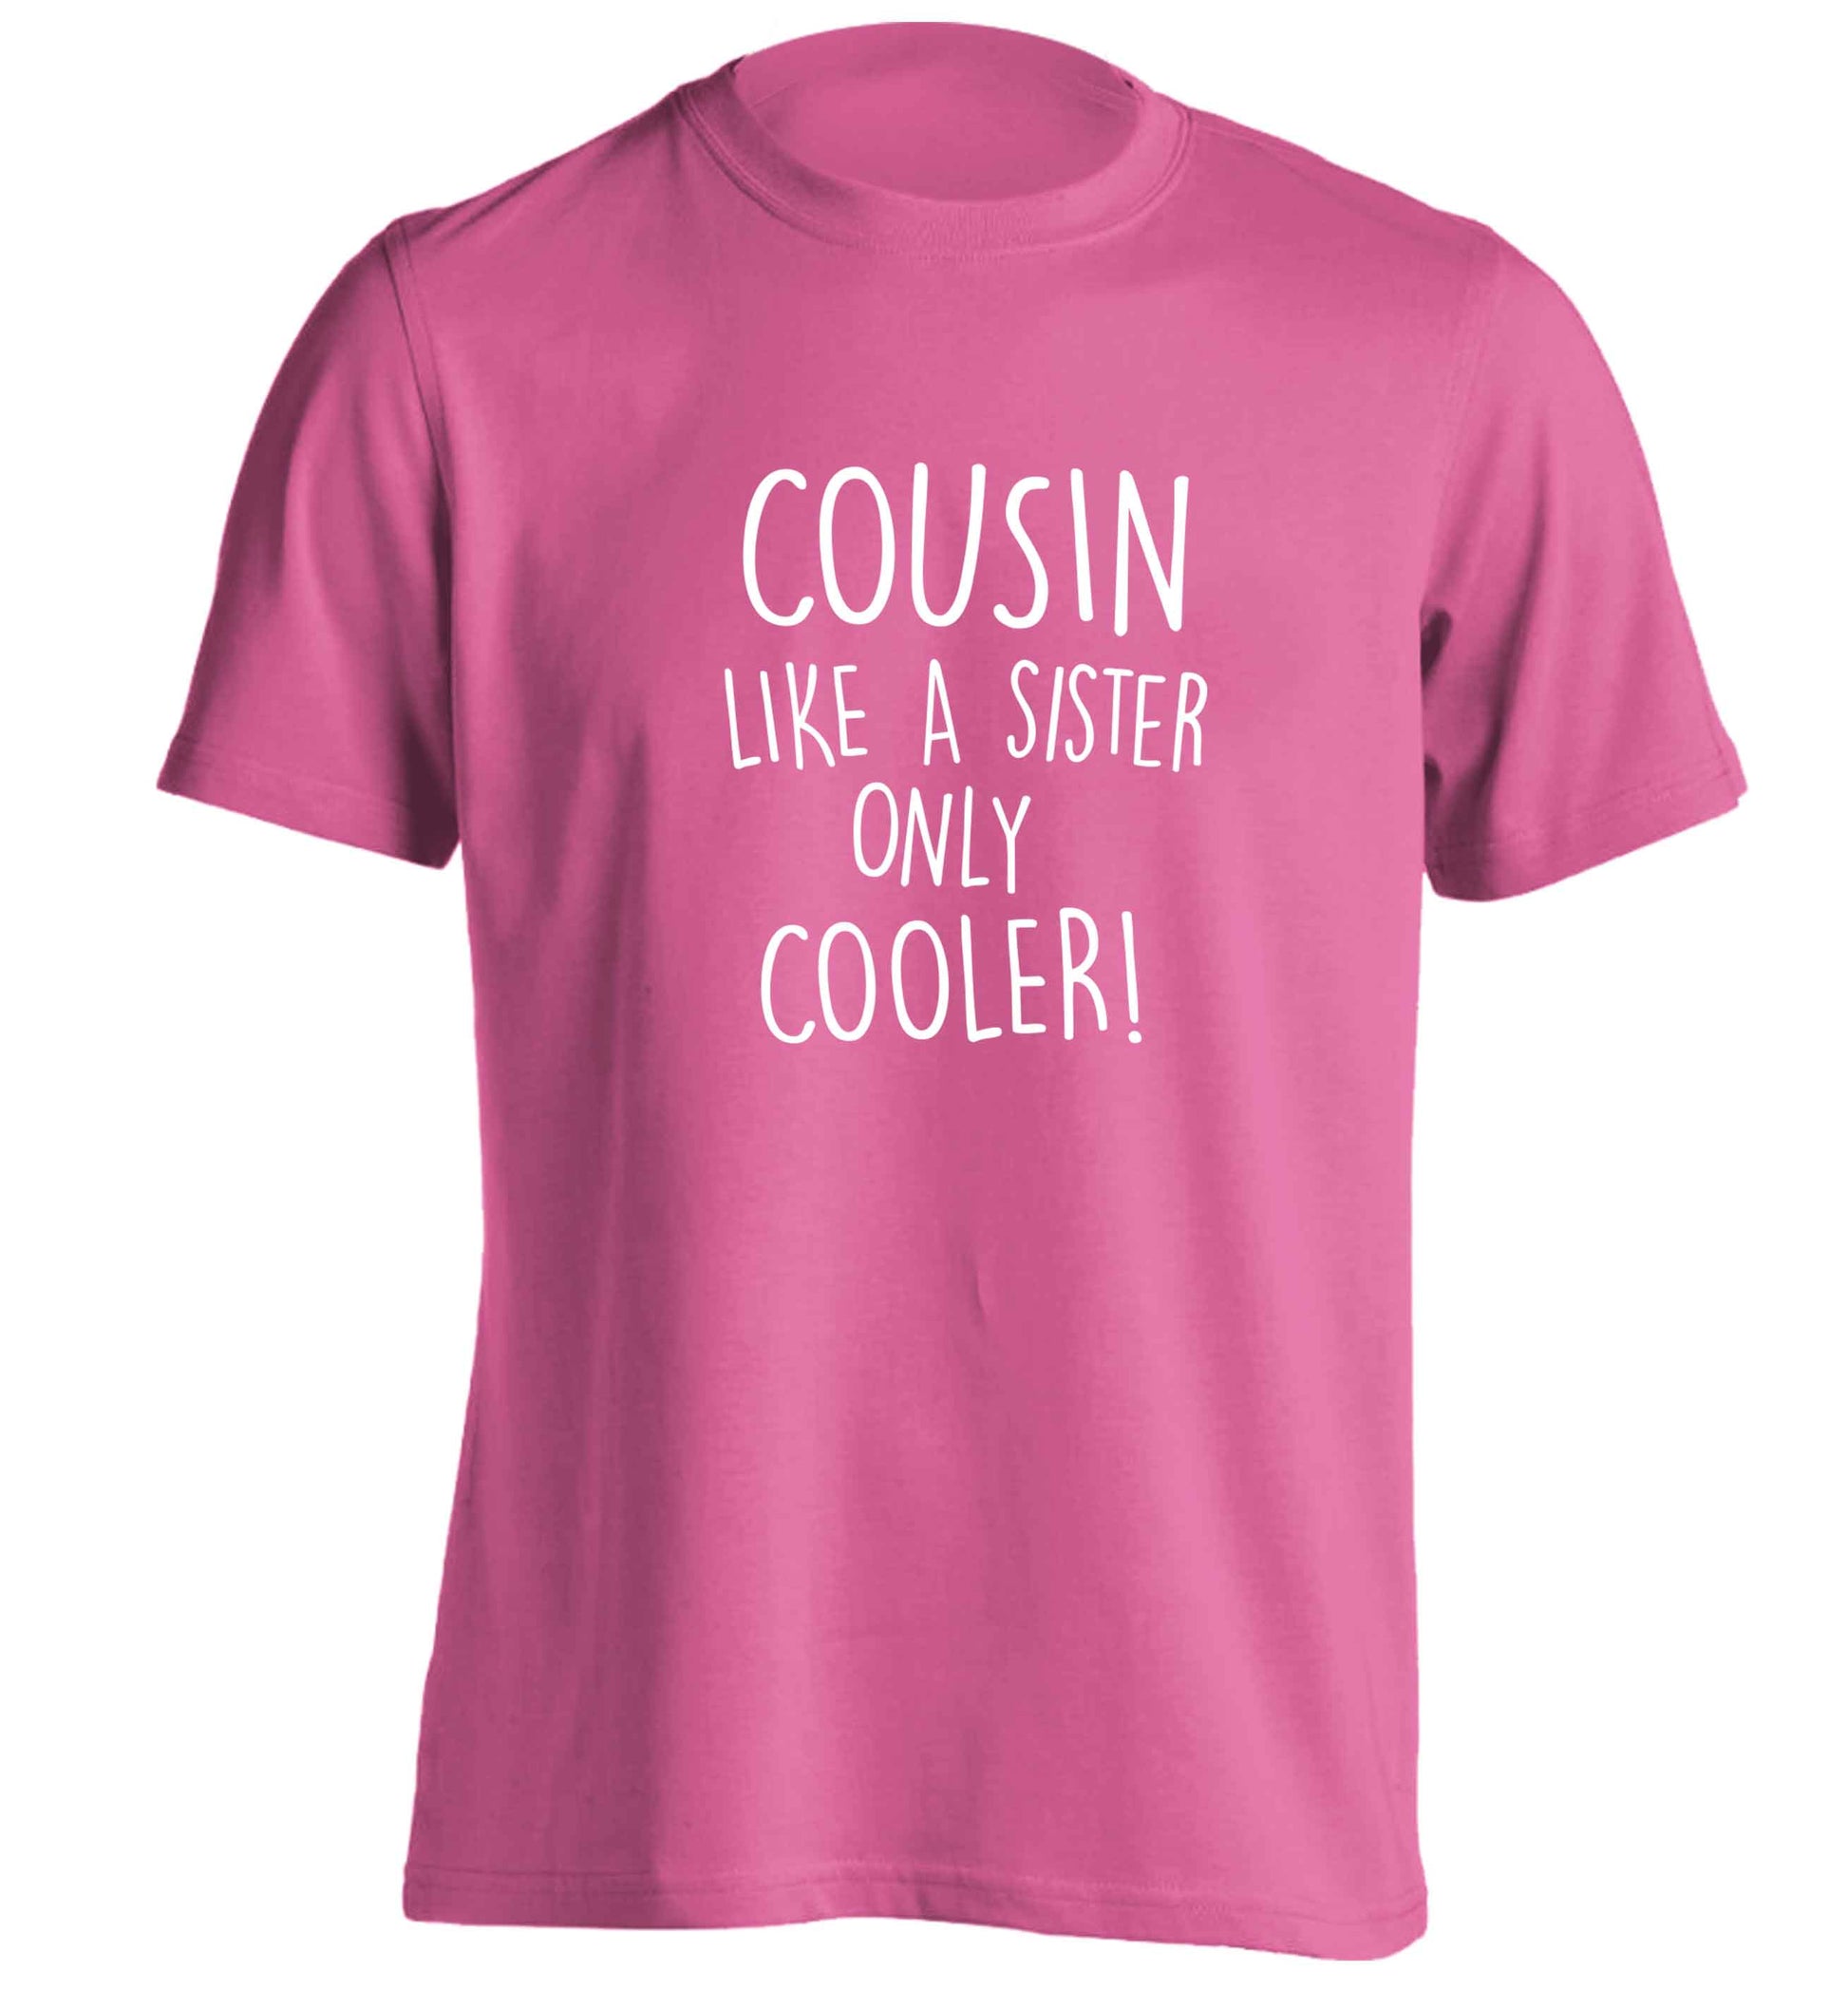 Cousin like a sister only cooler adults unisex pink Tshirt 2XL